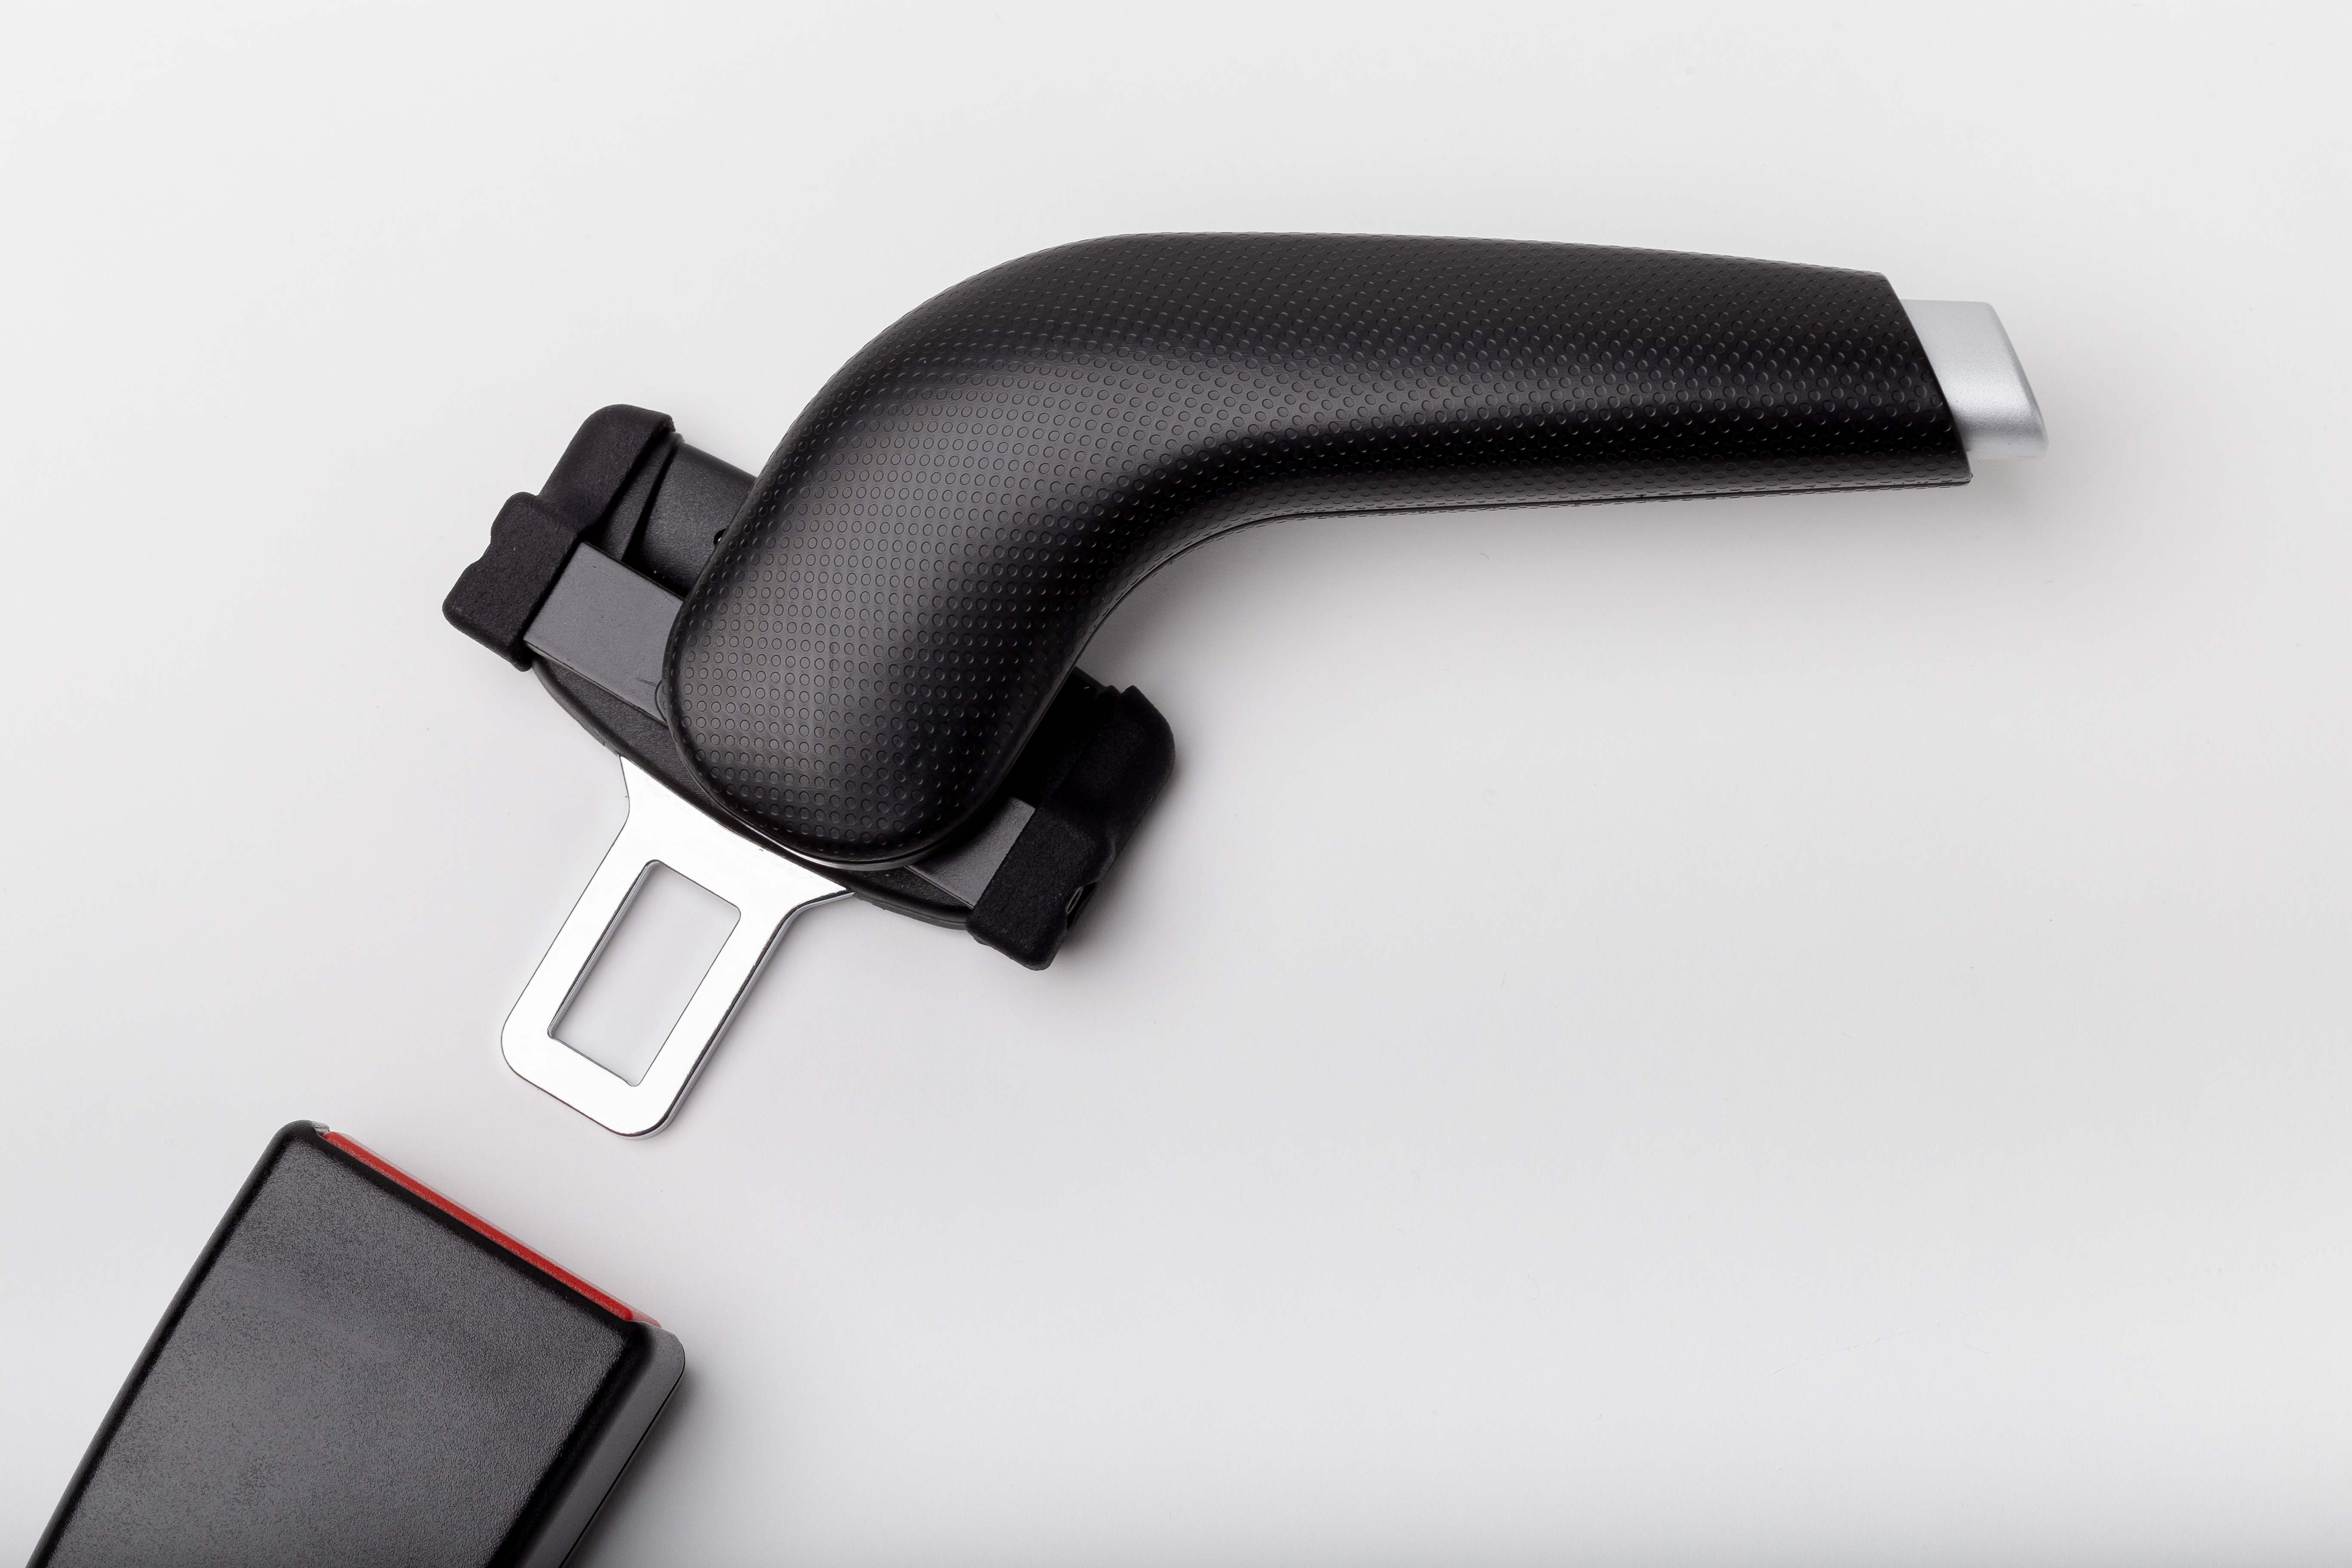 The JIMMY by Veigel is a seat buckle assist device designed to aid drivers with buckling and unbuckling the seat belt buckle in an automobile.